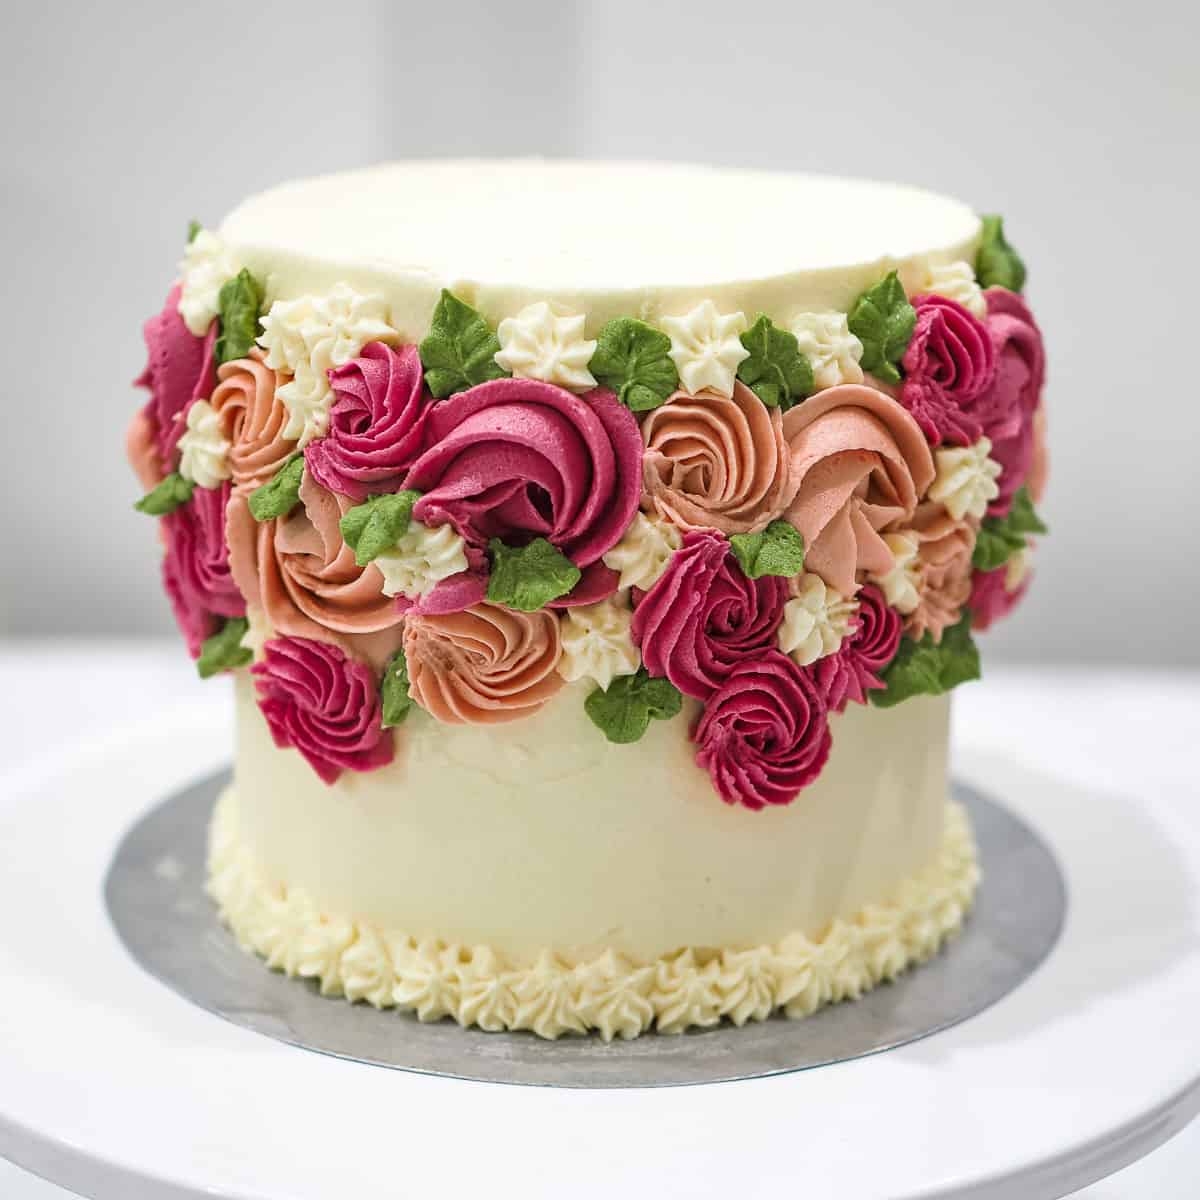 A round rosette cake in white, pink, burgundy and green.